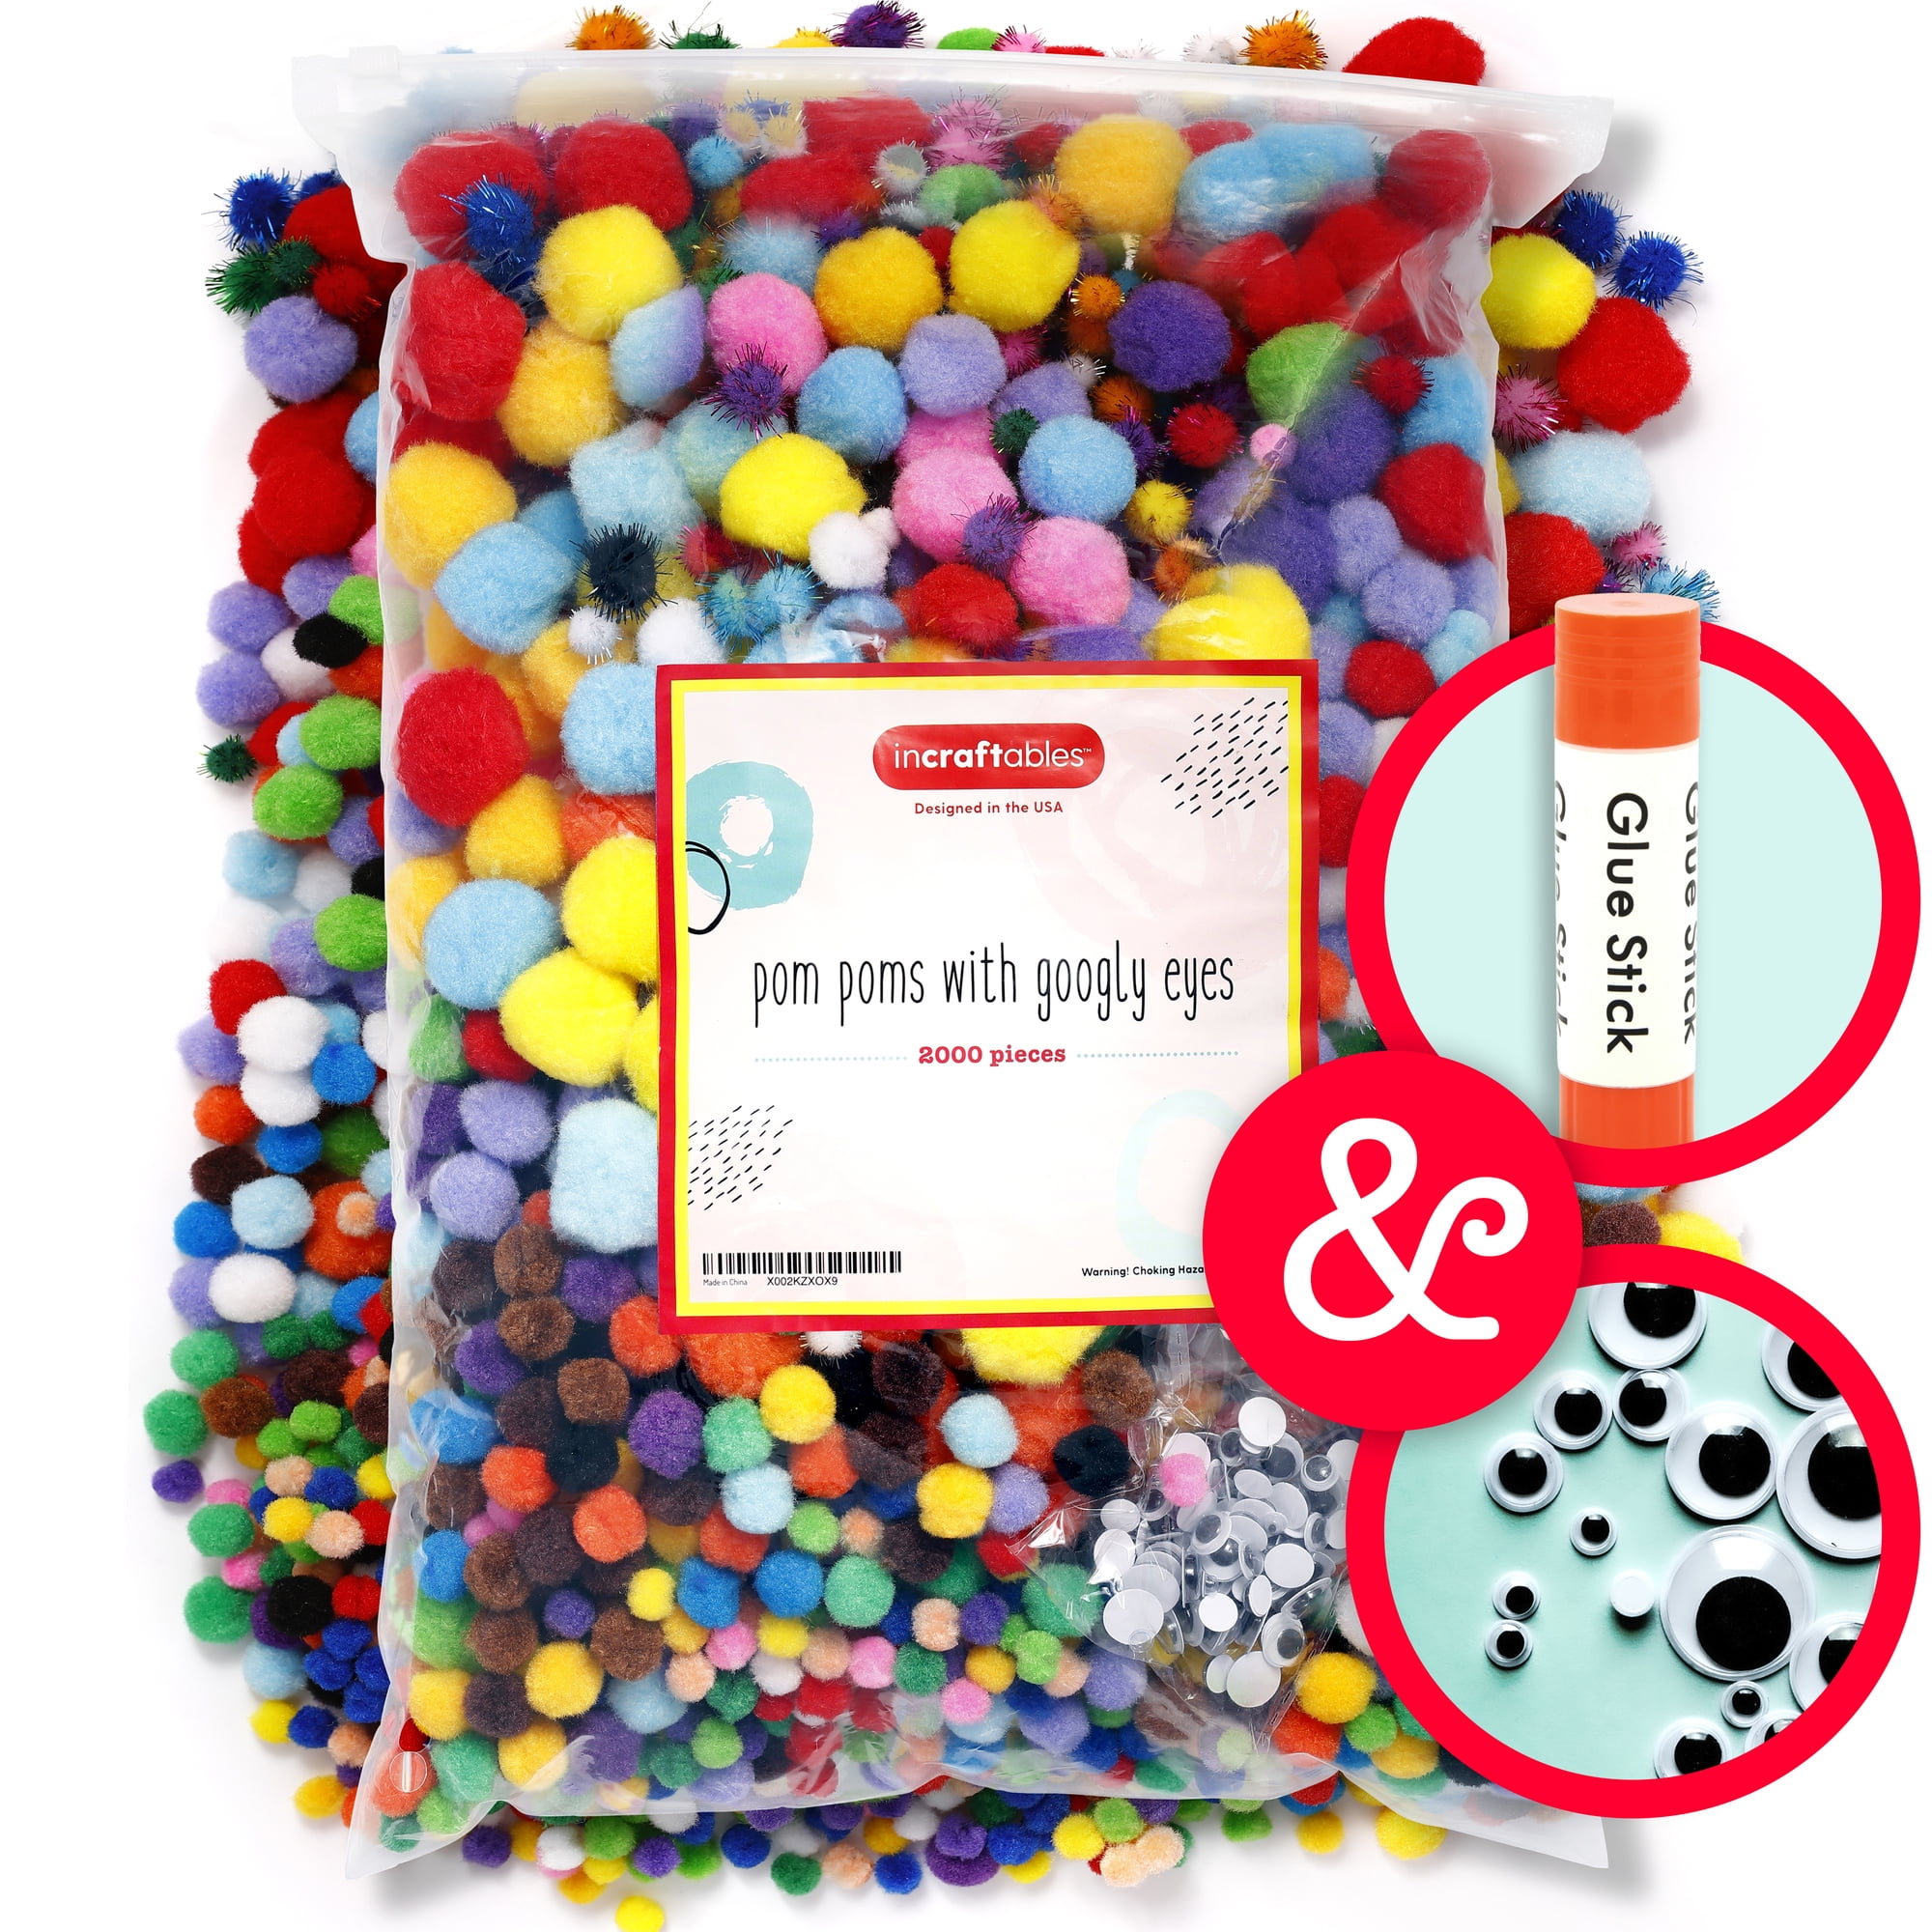 ZHAOER 1300 Pieces Pom Poms 5 Sizes Assorted Colors Pompoms for Crafts with 150 Pieces 3 Sizes Wiggle Eyes for Arts Craft and Decorations 